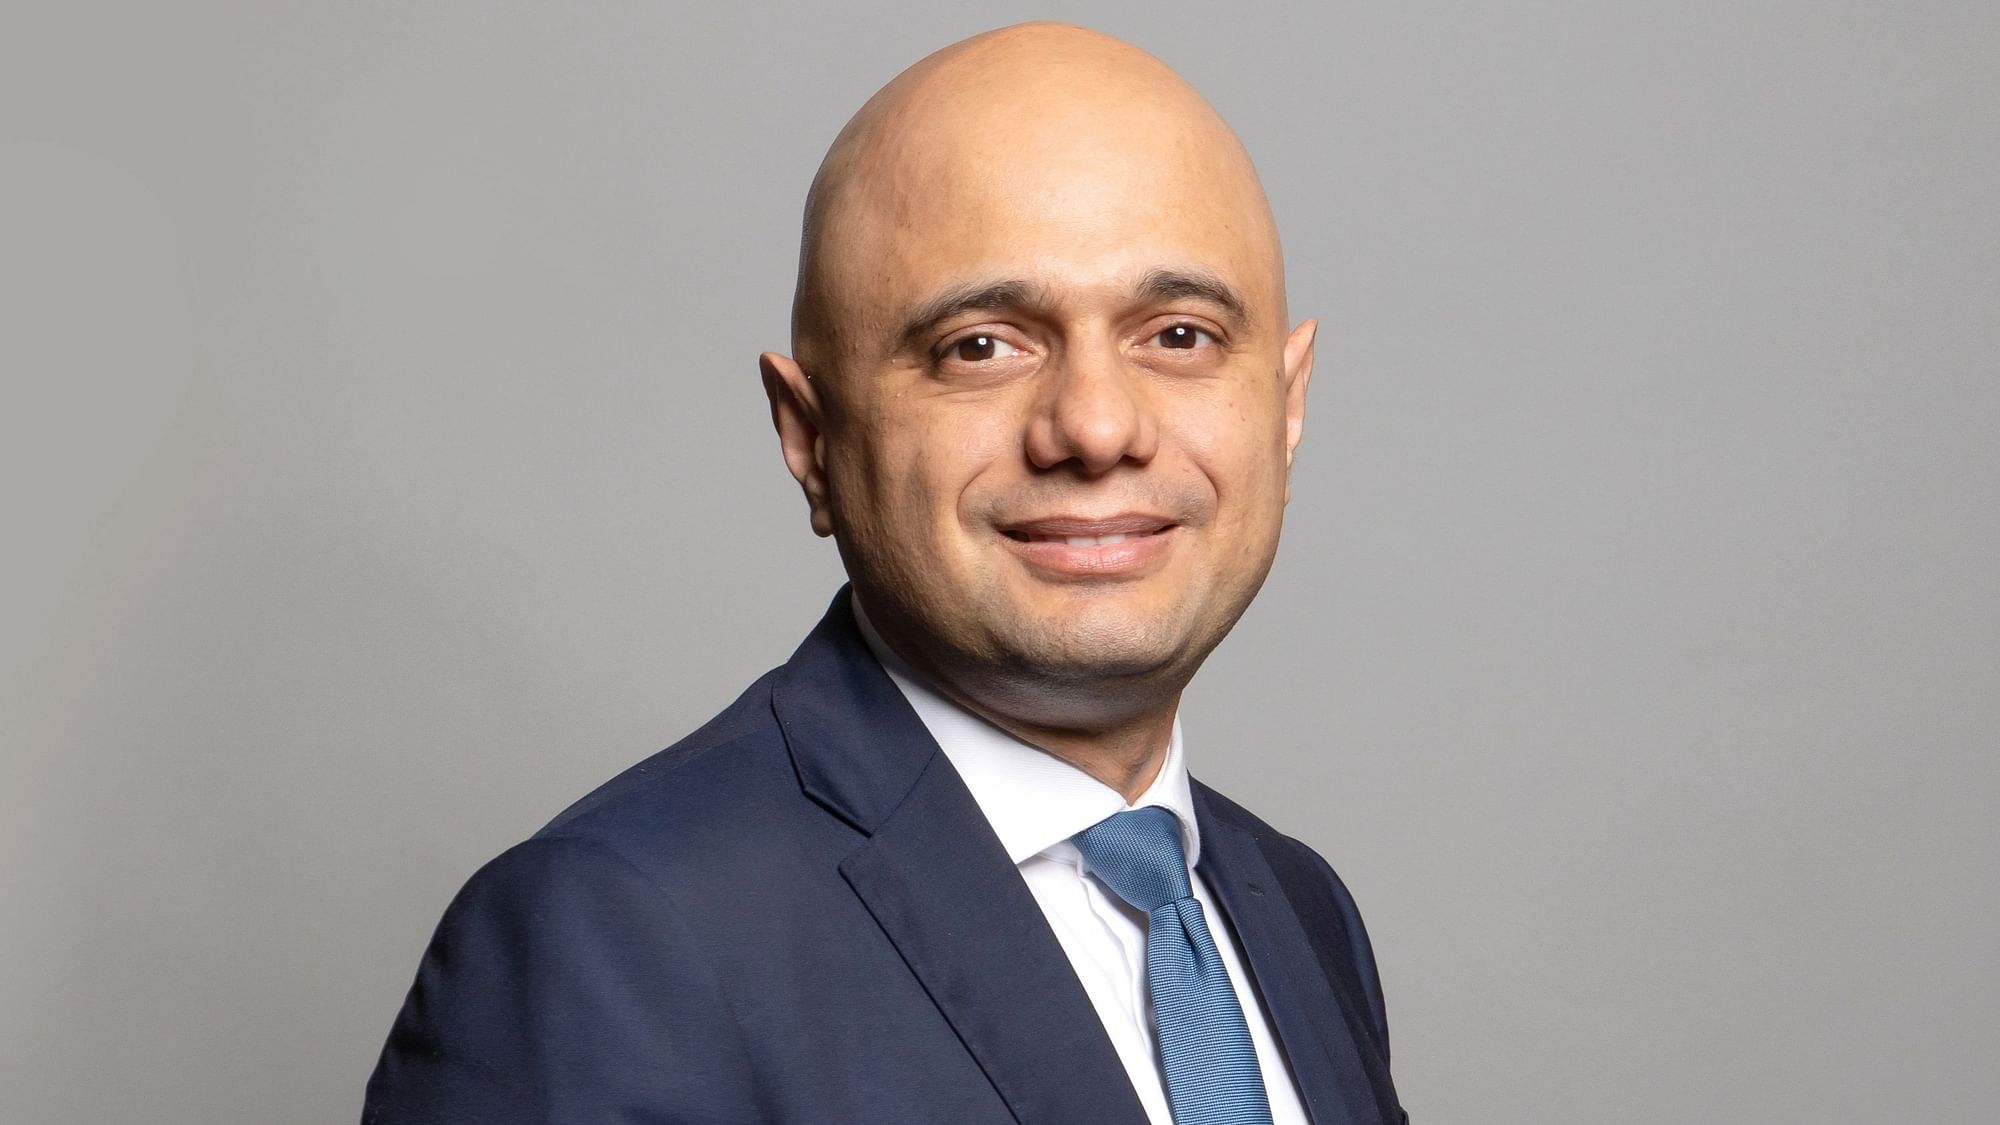 <div class="paragraphs"><p>Erstwhile Health Secretary Sajid Javid exited the British Cabinet on Tuesday, 5 July, turning in a <a href="https://www.thequint.com/news/world/uk-finance-minister-rishi-sunak-quits-cites-pm-boris-leadership#read-more">scathing resignation letter</a> to Prime Minister Boris Johnson.</p></div>